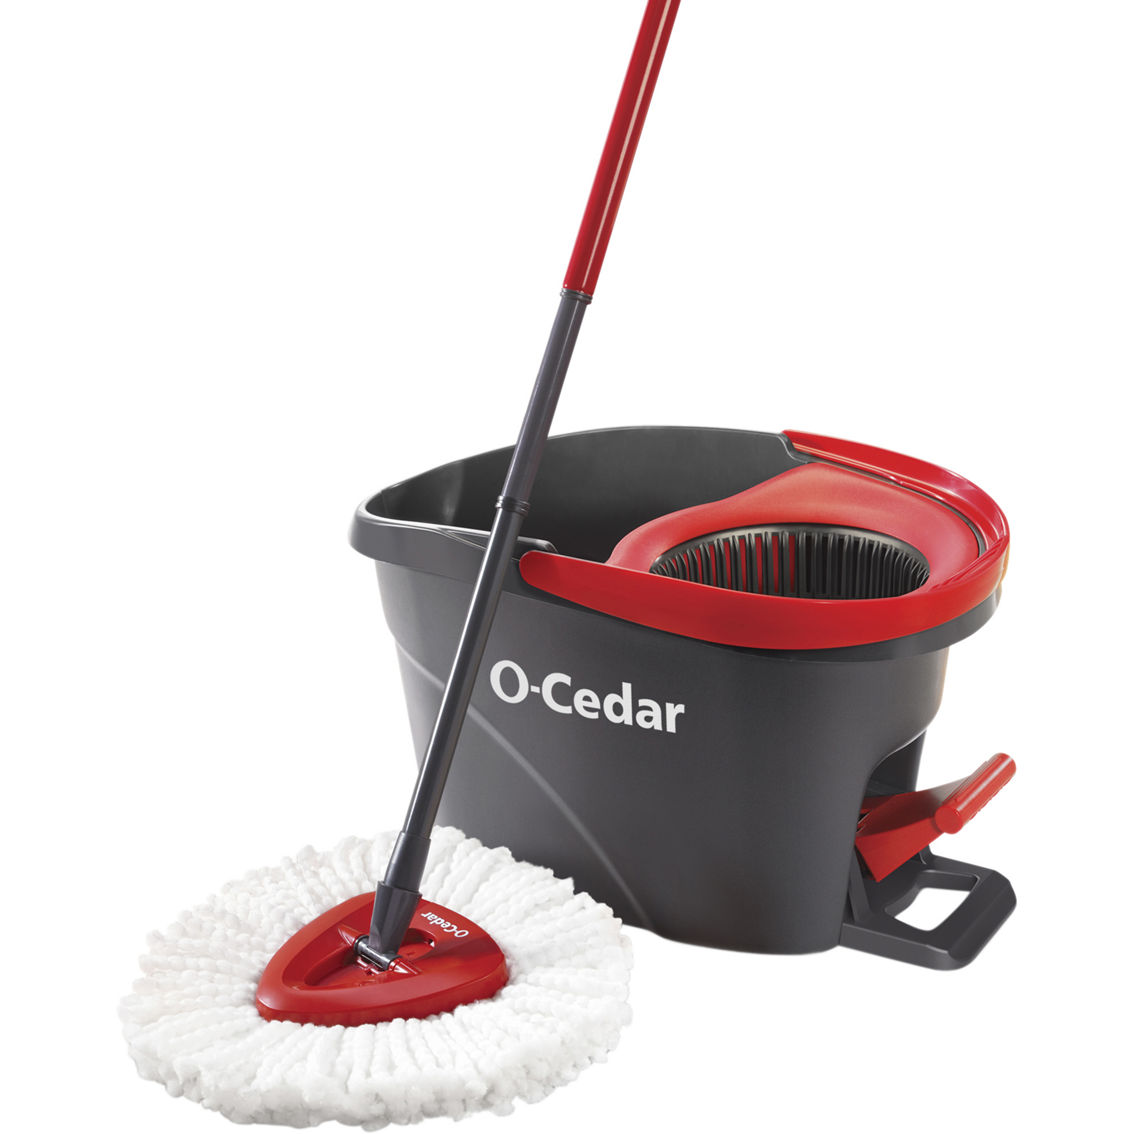 O-Cedar Easy Wring Spin Mop and Bucket Floor Cleaning System 